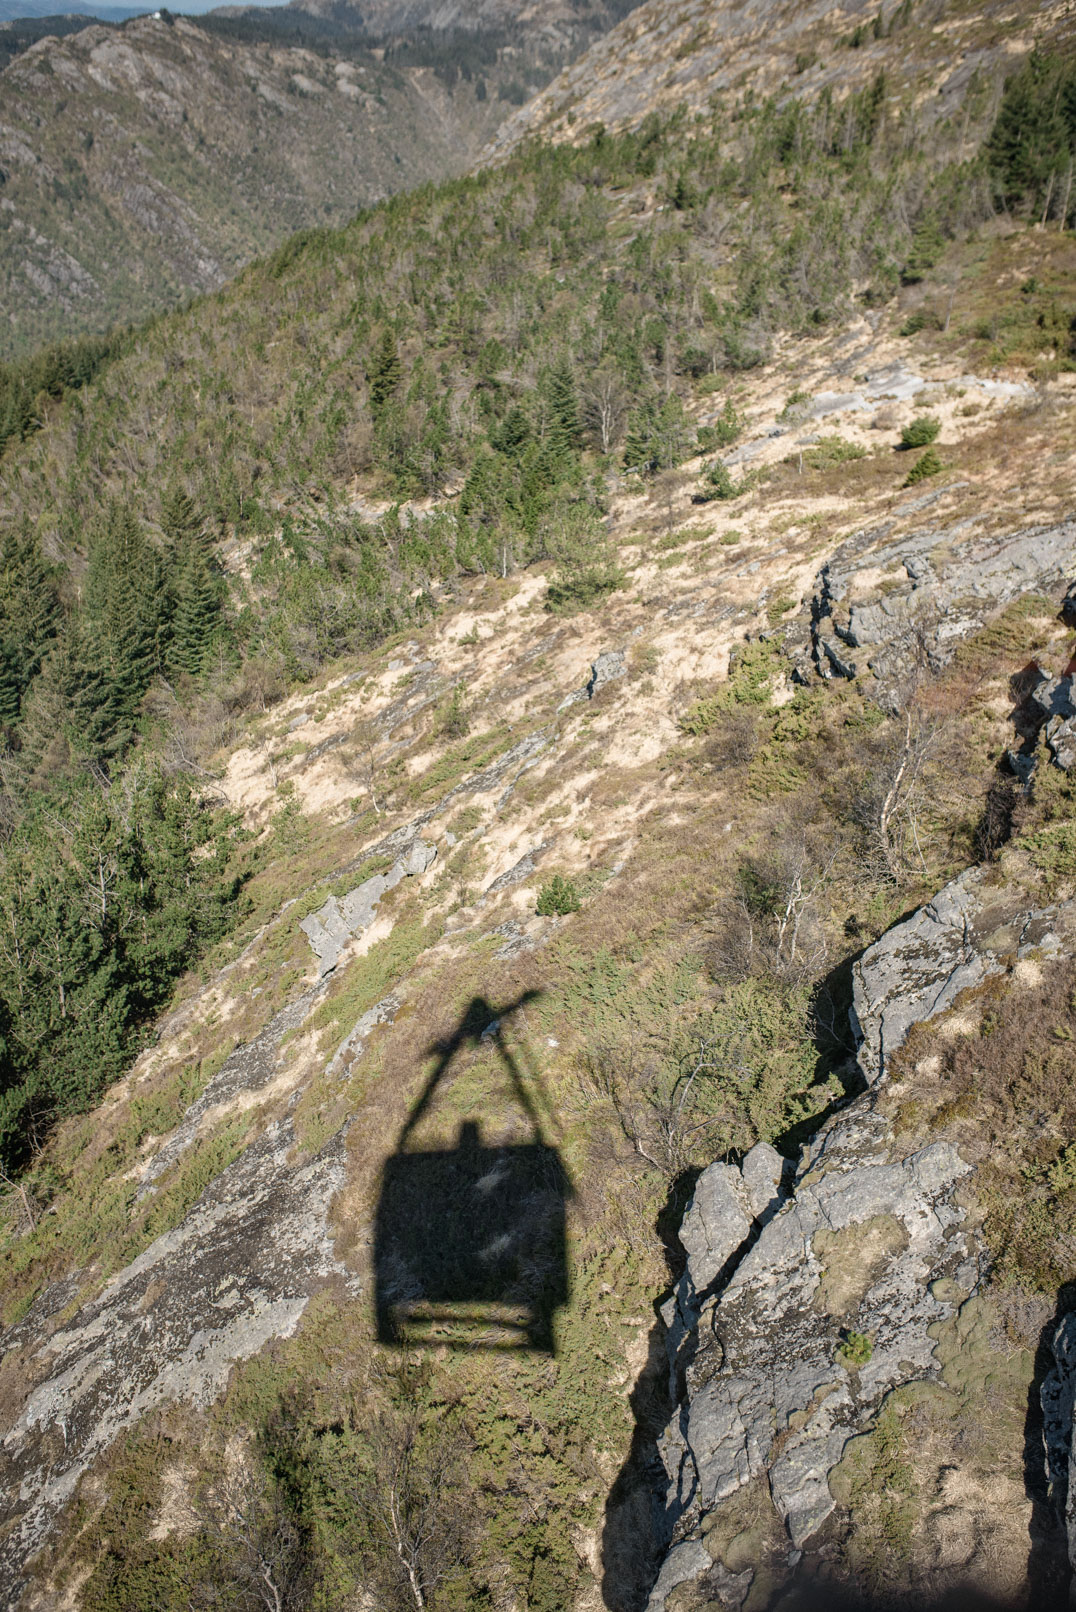 Ulriken 643 - The shadow of the cable car on the mountain